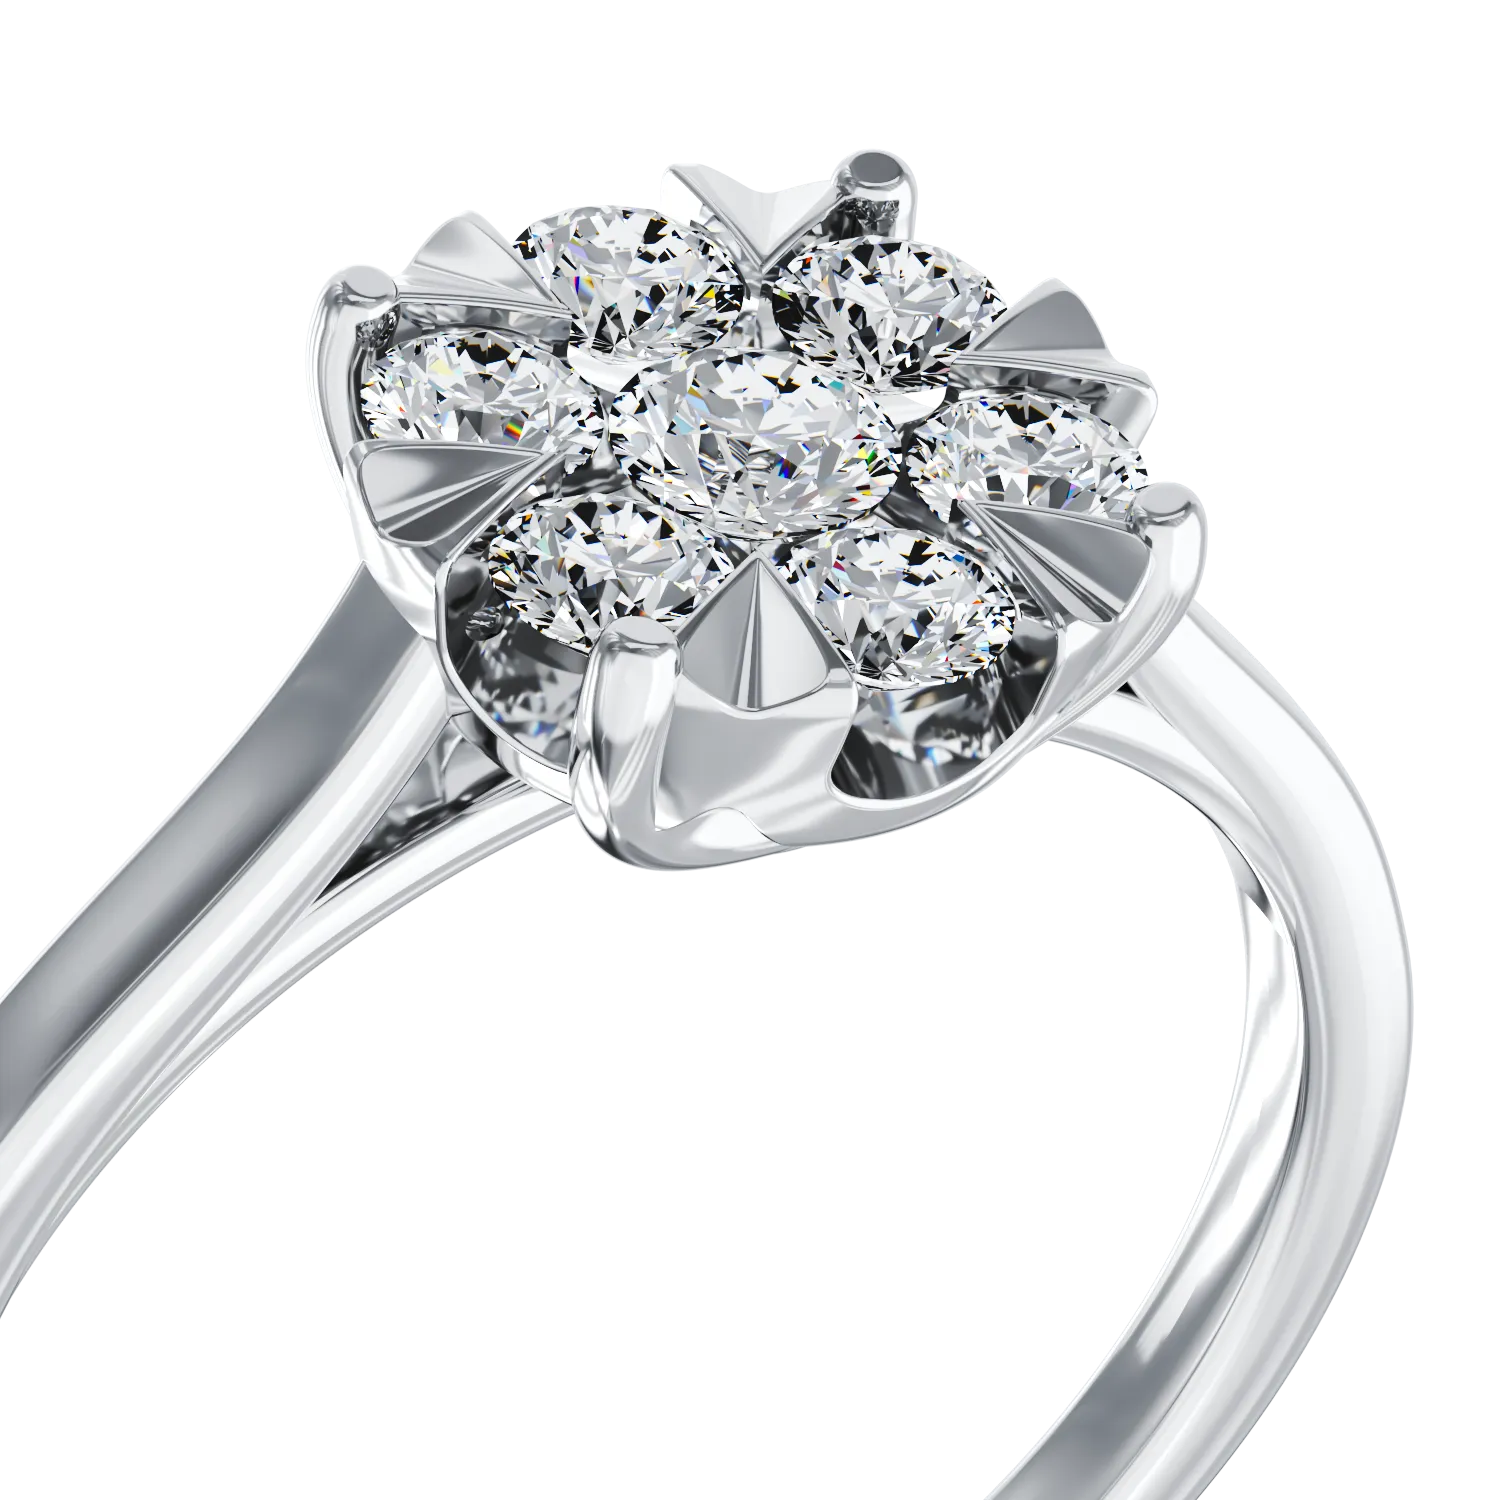 18K white gold engagement ring with 0.25ct diamonds